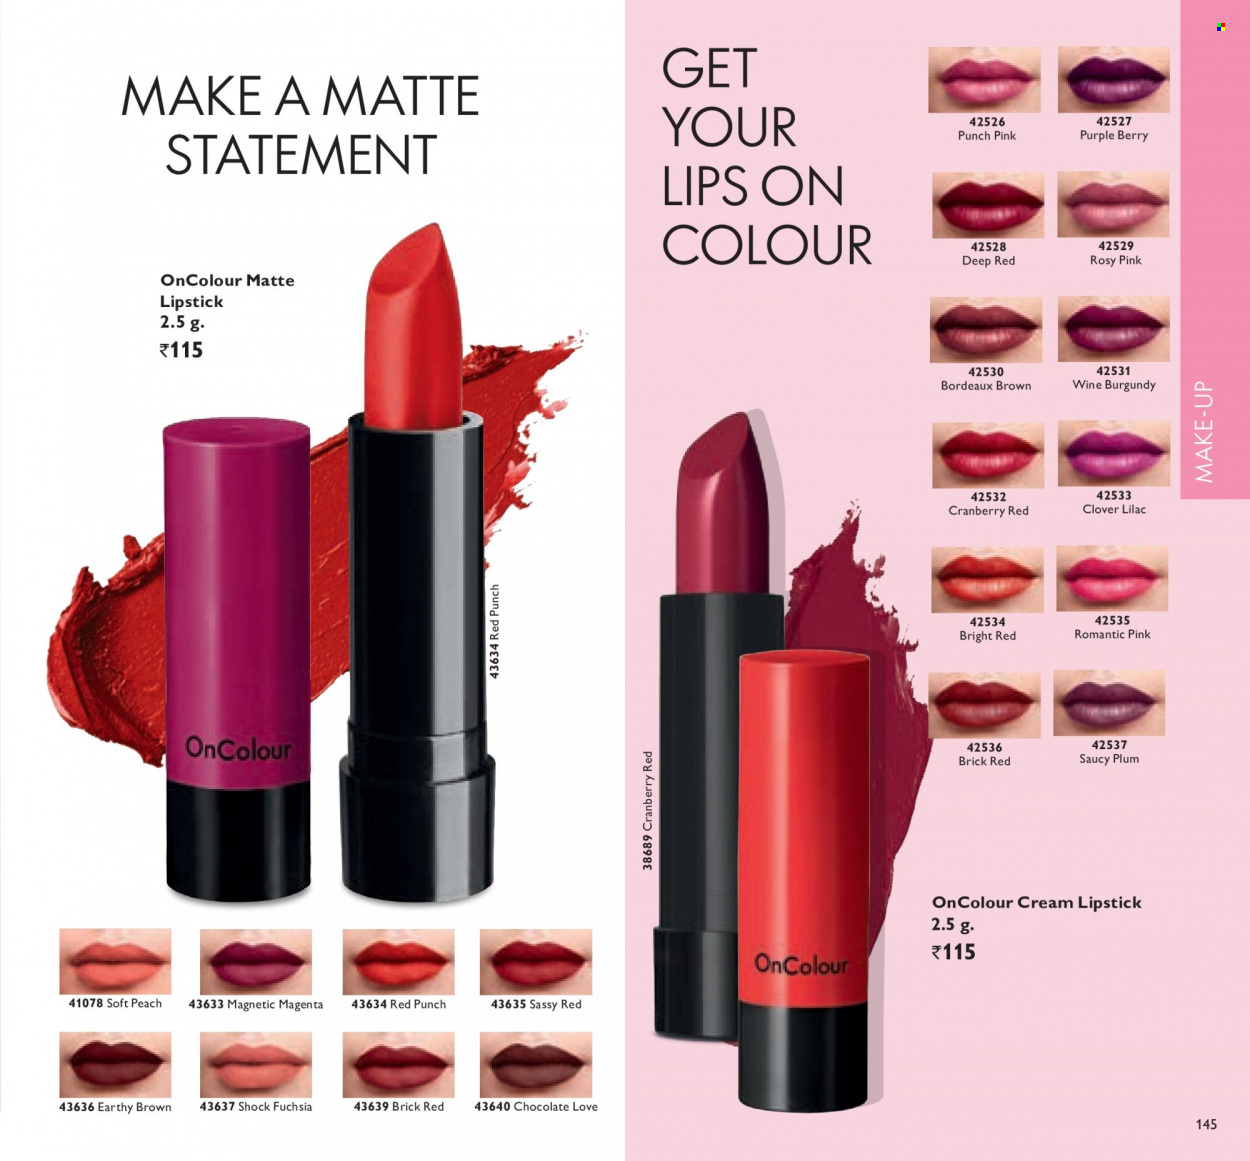 Oriflame offer . Page 145.